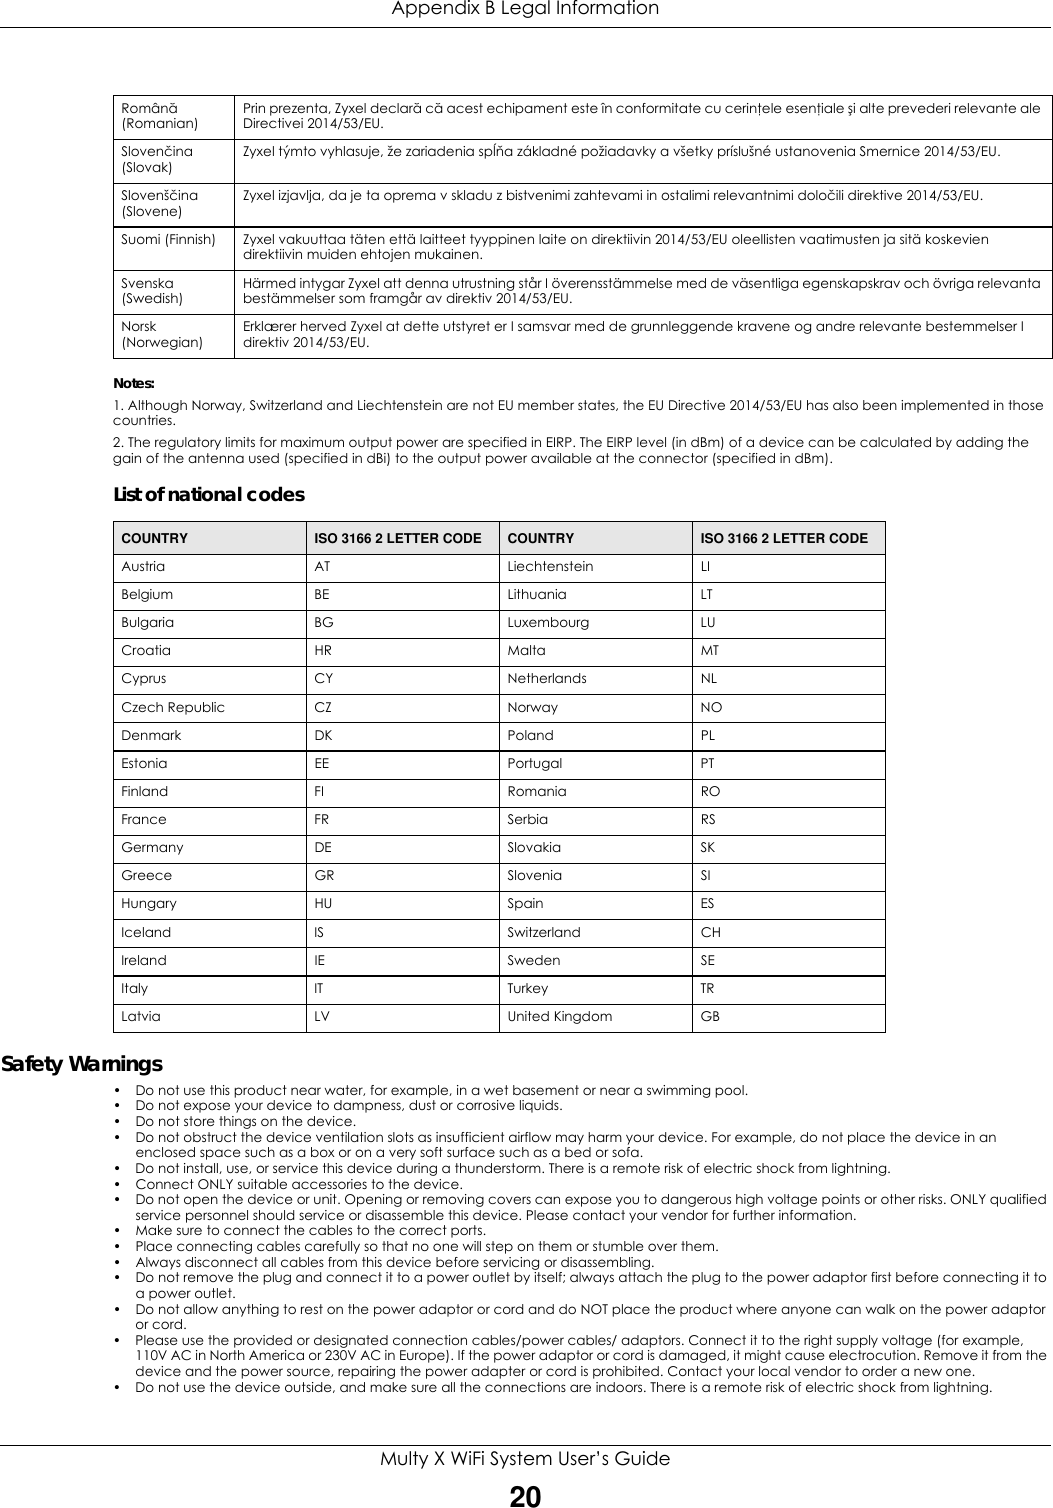 Appendix B Legal InformationMulty X WiFi System User’s Guide20Notes:1. Although Norway, Switzerland and Liechtenstein are not EU member states, the EU Directive 2014/53/EU has also been implemented in those countries.2. The regulatory limits for maximum output power are specified in EIRP. The EIRP level (in dBm) of a device can be calculated by adding the gain of the antenna used (specified in dBi) to the output power available at the connector (specified in dBm).List of national codesSafety Warnings• Do not use this product near water, for example, in a wet basement or near a swimming pool.• Do not expose your device to dampness, dust or corrosive liquids.• Do not store things on the device.• Do not obstruct the device ventilation slots as insufficient airflow may harm your device. For example, do not place the device in an enclosed space such as a box or on a very soft surface such as a bed or sofa.• Do not install, use, or service this device during a thunderstorm. There is a remote risk of electric shock from lightning.• Connect ONLY suitable accessories to the device.• Do not open the device or unit. Opening or removing covers can expose you to dangerous high voltage points or other risks. ONLY qualified service personnel should service or disassemble this device. Please contact your vendor for further information.• Make sure to connect the cables to the correct ports.• Place connecting cables carefully so that no one will step on them or stumble over them.• Always disconnect all cables from this device before servicing or disassembling.• Do not remove the plug and connect it to a power outlet by itself; always attach the plug to the power adaptor first before connecting it to a power outlet.• Do not allow anything to rest on the power adaptor or cord and do NOT place the product where anyone can walk on the power adaptor or cord.• Please use the provided or designated connection cables/power cables/ adaptors. Connect it to the right supply voltage (for example, 110V AC in North America or 230V AC in Europe). If the power adaptor or cord is damaged, it might cause electrocution. Remove it from the device and the power source, repairing the power adapter or cord is prohibited. Contact your local vendor to order a new one.• Do not use the device outside, and make sure all the connections are indoors. There is a remote risk of electric shock from lightning.Română (Romanian)Prin prezenta, Zyxel declară că acest echipament este în conformitate cu cerinţele esenţiale şi alte prevederi relevante ale Directivei 2014/53/EU.Slovenčina (Slovak)Zyxel týmto vyhlasuje, že zariadenia spĺňa základné požiadavky a všetky príslušné ustanovenia Smernice 2014/53/EU.Slovenščina (Slovene)Zyxel izjavlja, da je ta oprema v skladu z bistvenimi zahtevami in ostalimi relevantnimi določili direktive 2014/53/EU.Suomi (Finnish) Zyxel vakuuttaa täten että laitteet tyyppinen laite on direktiivin 2014/53/EU oleellisten vaatimusten ja sitä koskevien direktiivin muiden ehtojen mukainen.Svenska (Swedish)Härmed intygar Zyxel att denna utrustning står I överensstämmelse med de väsentliga egenskapskrav och övriga relevanta bestämmelser som framgår av direktiv 2014/53/EU.Norsk (Norwegian)Erklærer herved Zyxel at dette utstyret er I samsvar med de grunnleggende kravene og andre relevante bestemmelser I direktiv 2014/53/EU.COUNTRY ISO 3166 2 LETTER CODE COUNTRY ISO 3166 2 LETTER CODEAustria AT Liechtenstein LIBelgium BE Lithuania LTBulgaria BG Luxembourg LUCroatia HR Malta MTCyprus CY Netherlands NLCzech Republic CZ Norway NODenmark DK Poland PLEstonia EE Portugal PTFinland FI Romania ROFrance FR Serbia RSGermany DE Slovakia SKGreece GR Slovenia SIHungary HU Spain ESIceland IS Switzerland CHIreland IE Sweden SEItaly IT Turkey TRLatvia LV United Kingdom GB